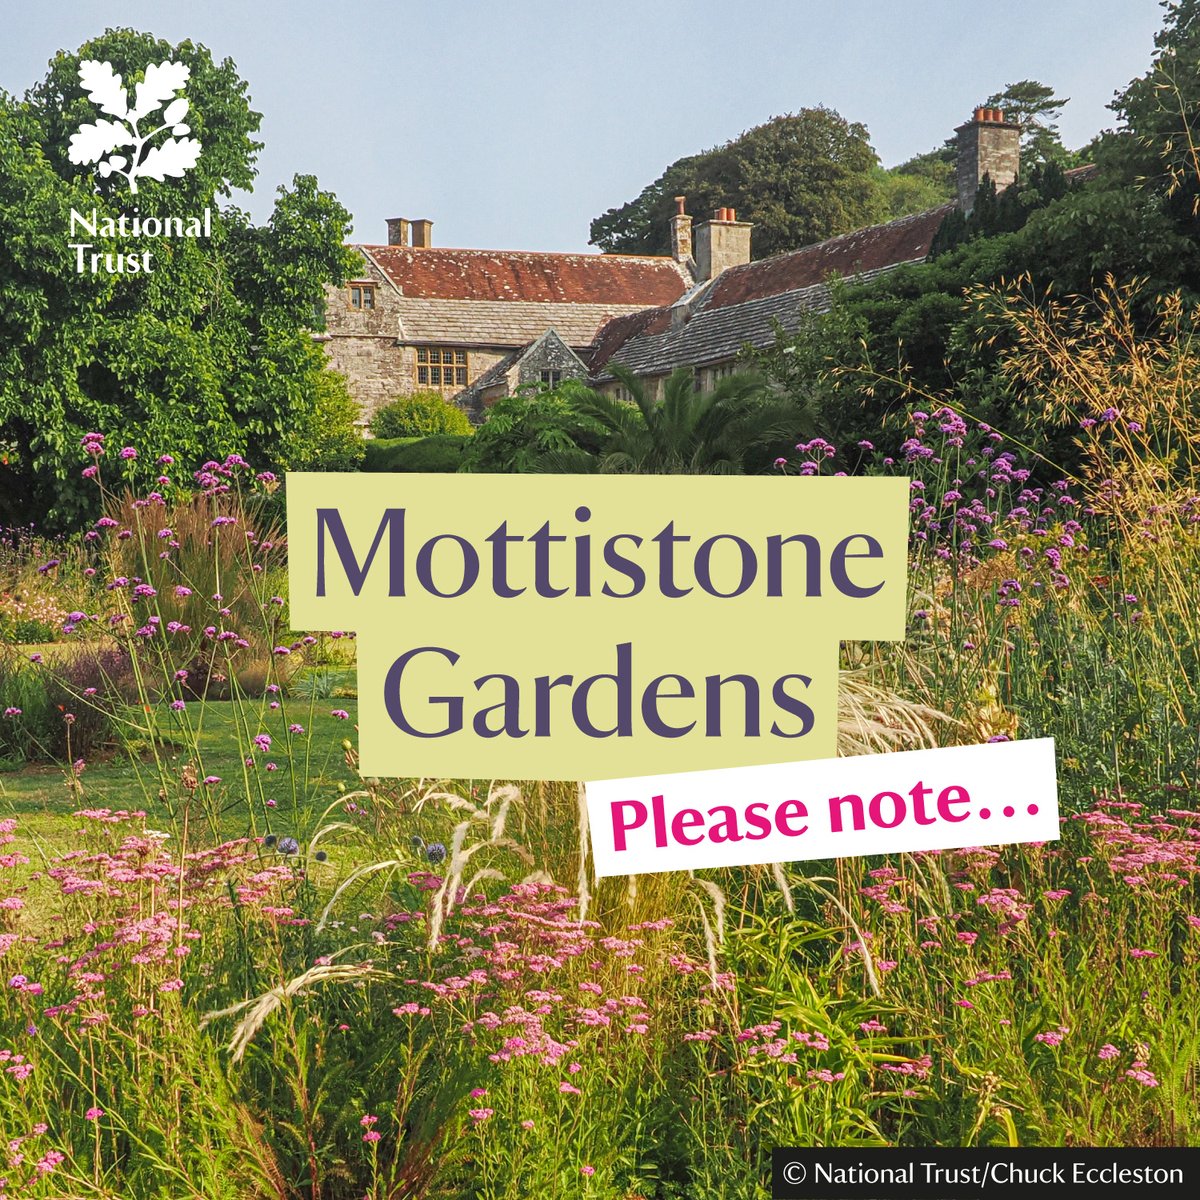 Just a reminder that #MottistoneGardens will be closing early today (Thursday 9 May) at 2pm. We're sorry for any inconvenience this may cause but thank you for your understanding. We'll be open this morning from 10.30am as usual and look forward to welcoming you. #IsleOfWight